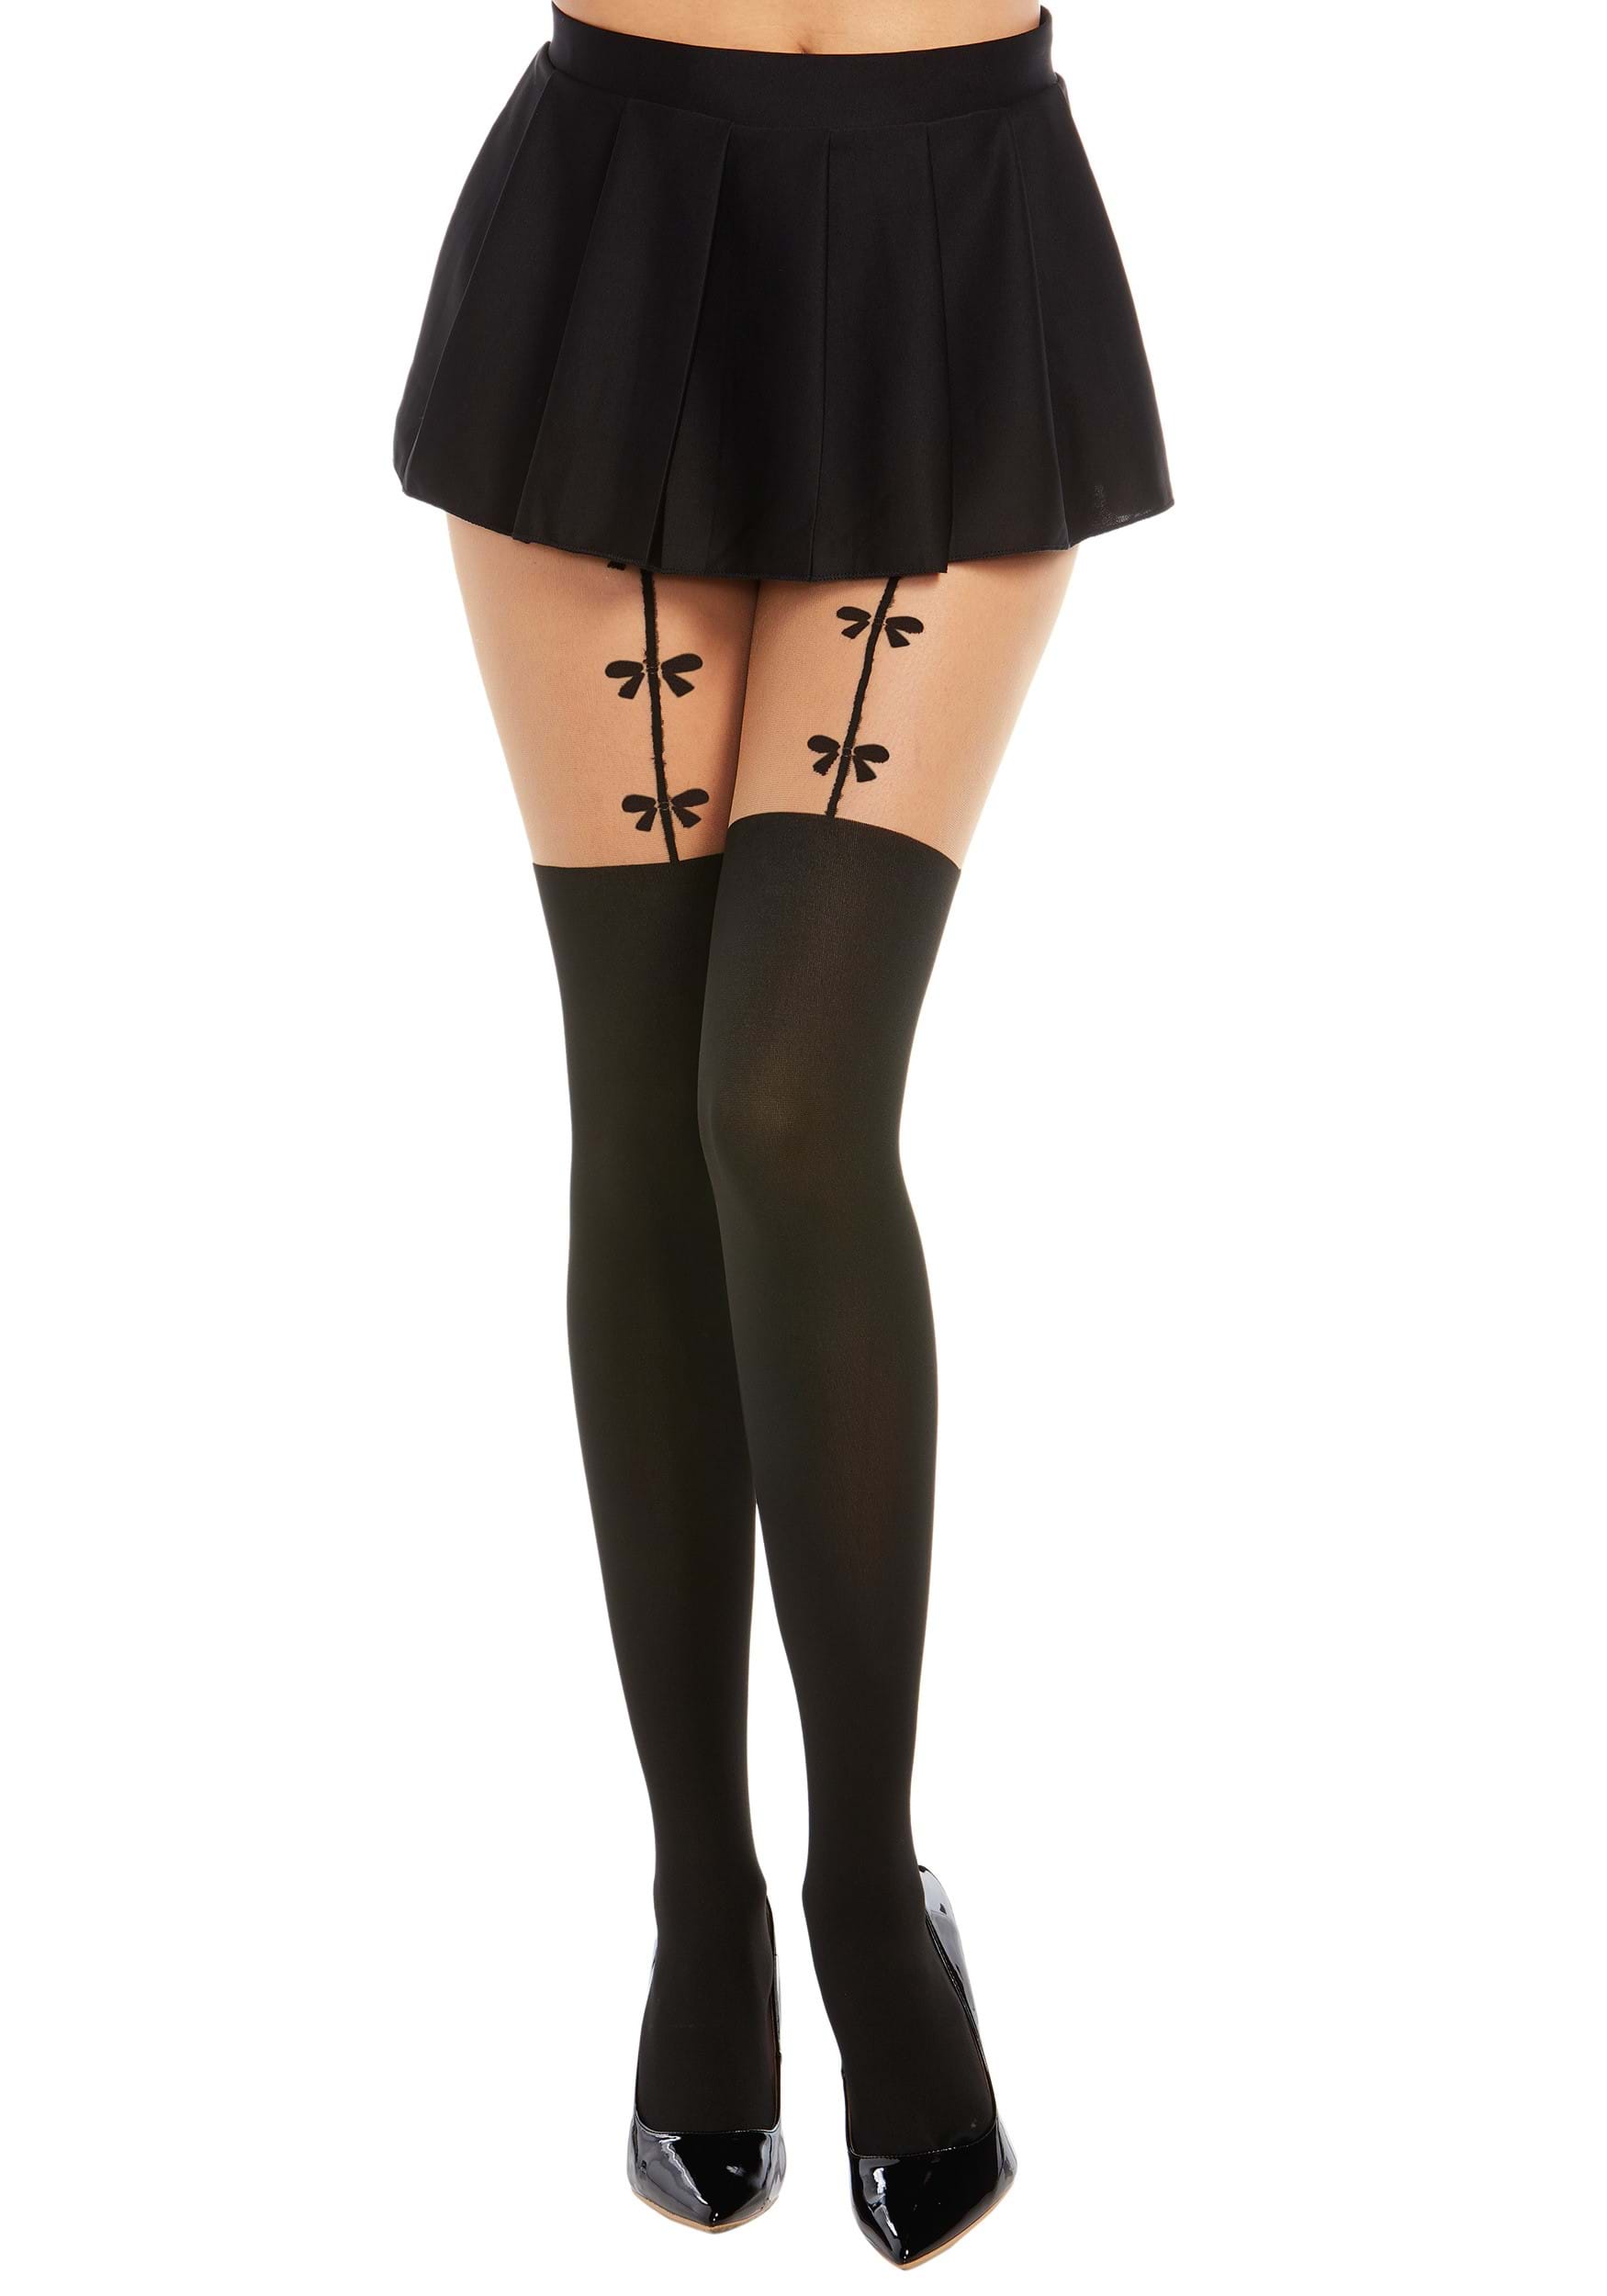 https://images.halloween.com/products/92729/1-1/womens-sheer-beige-and-black-faux-thigh-highs.jpg